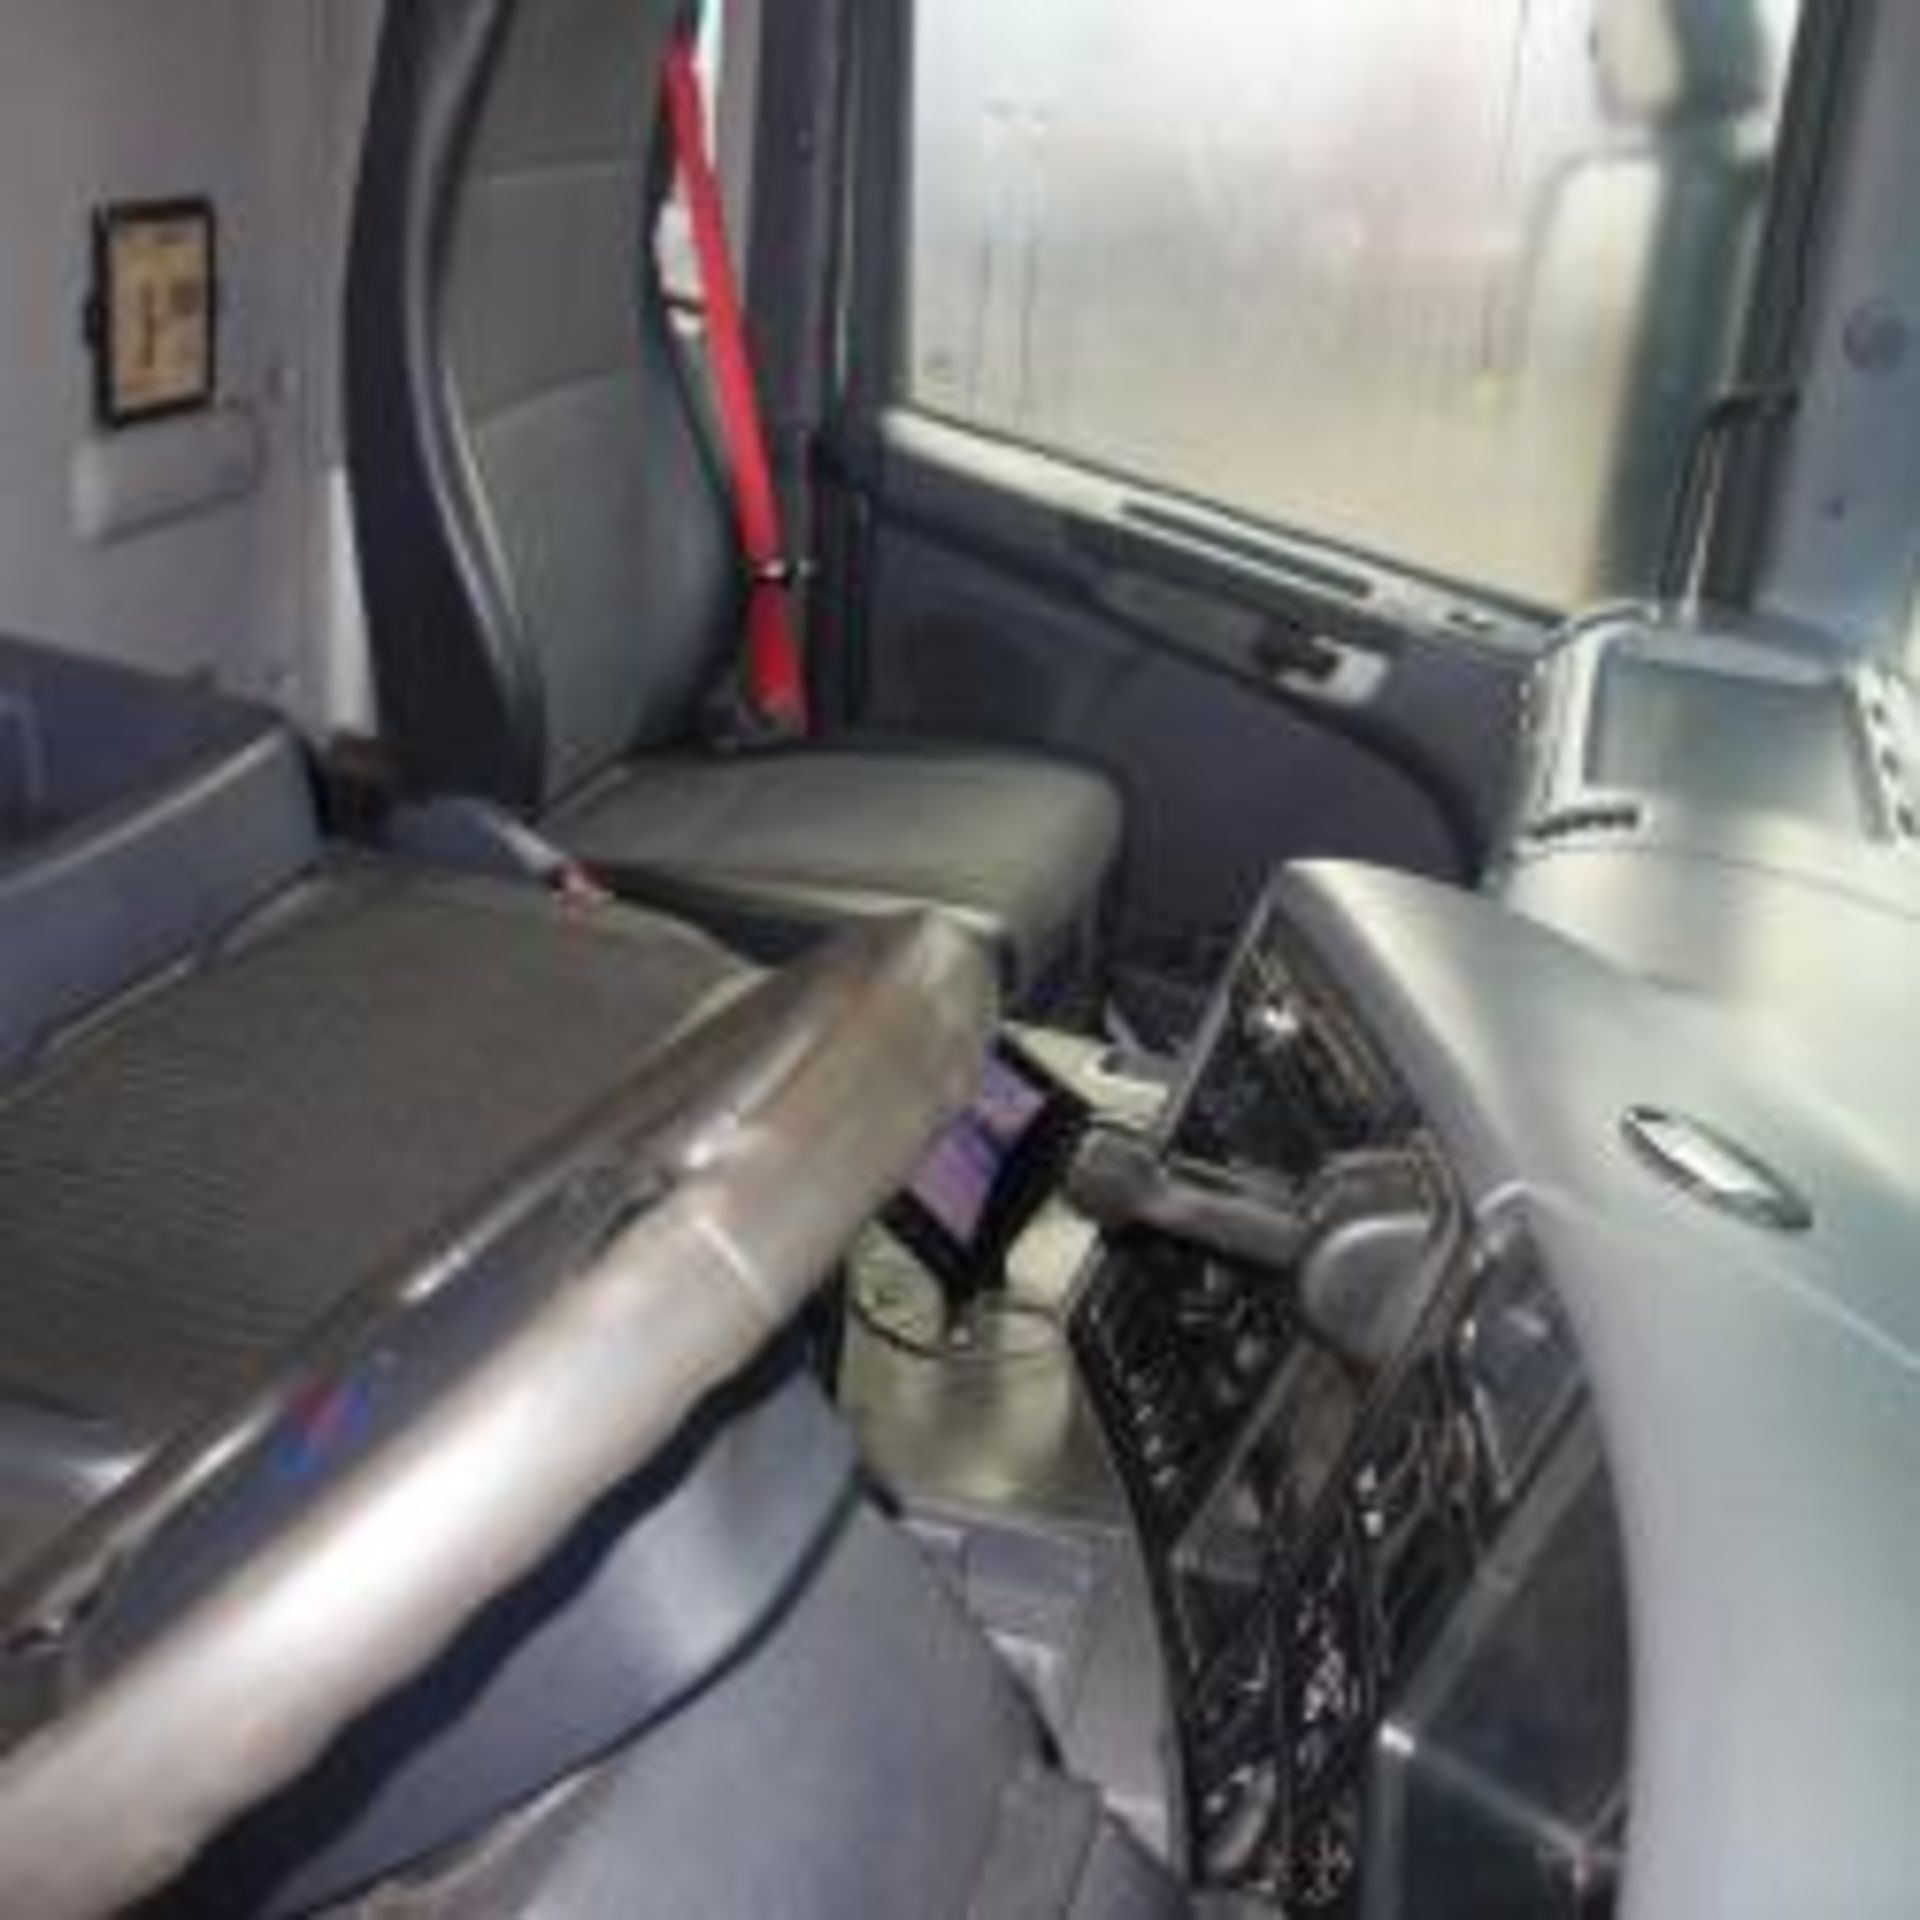 2012 Scania Plant Lorry Rear Steer And Lift Axle. - Image 3 of 13